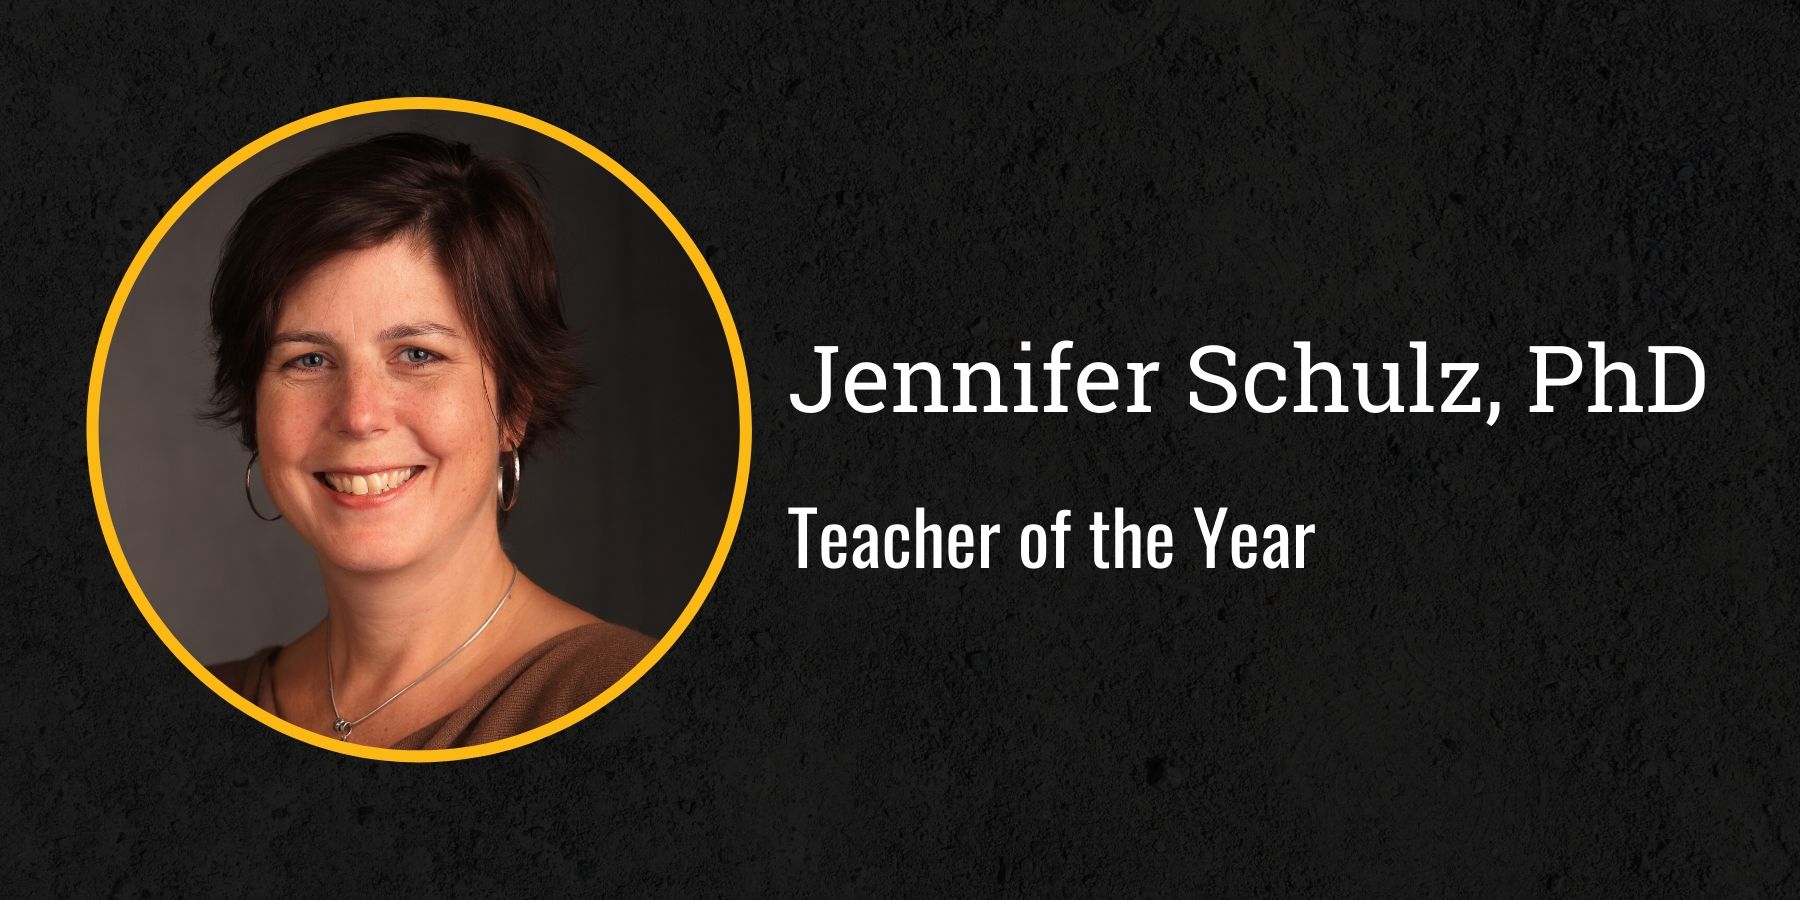 Photo of Jennifer Schulz and text Teacher of the Year